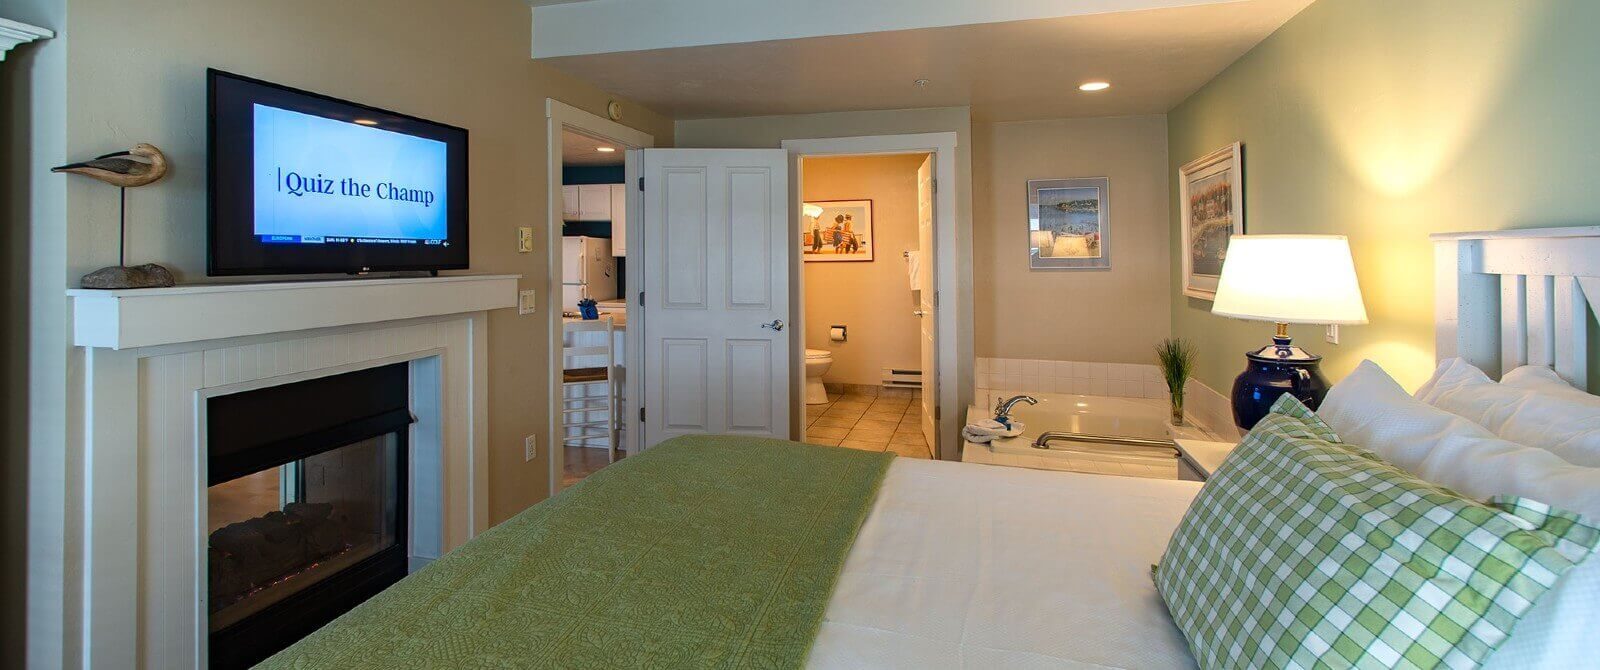 Elegant bedroom with king bed, double sided gas fireplace, TV and corner jacuzzi tub near doorway to a bathroom